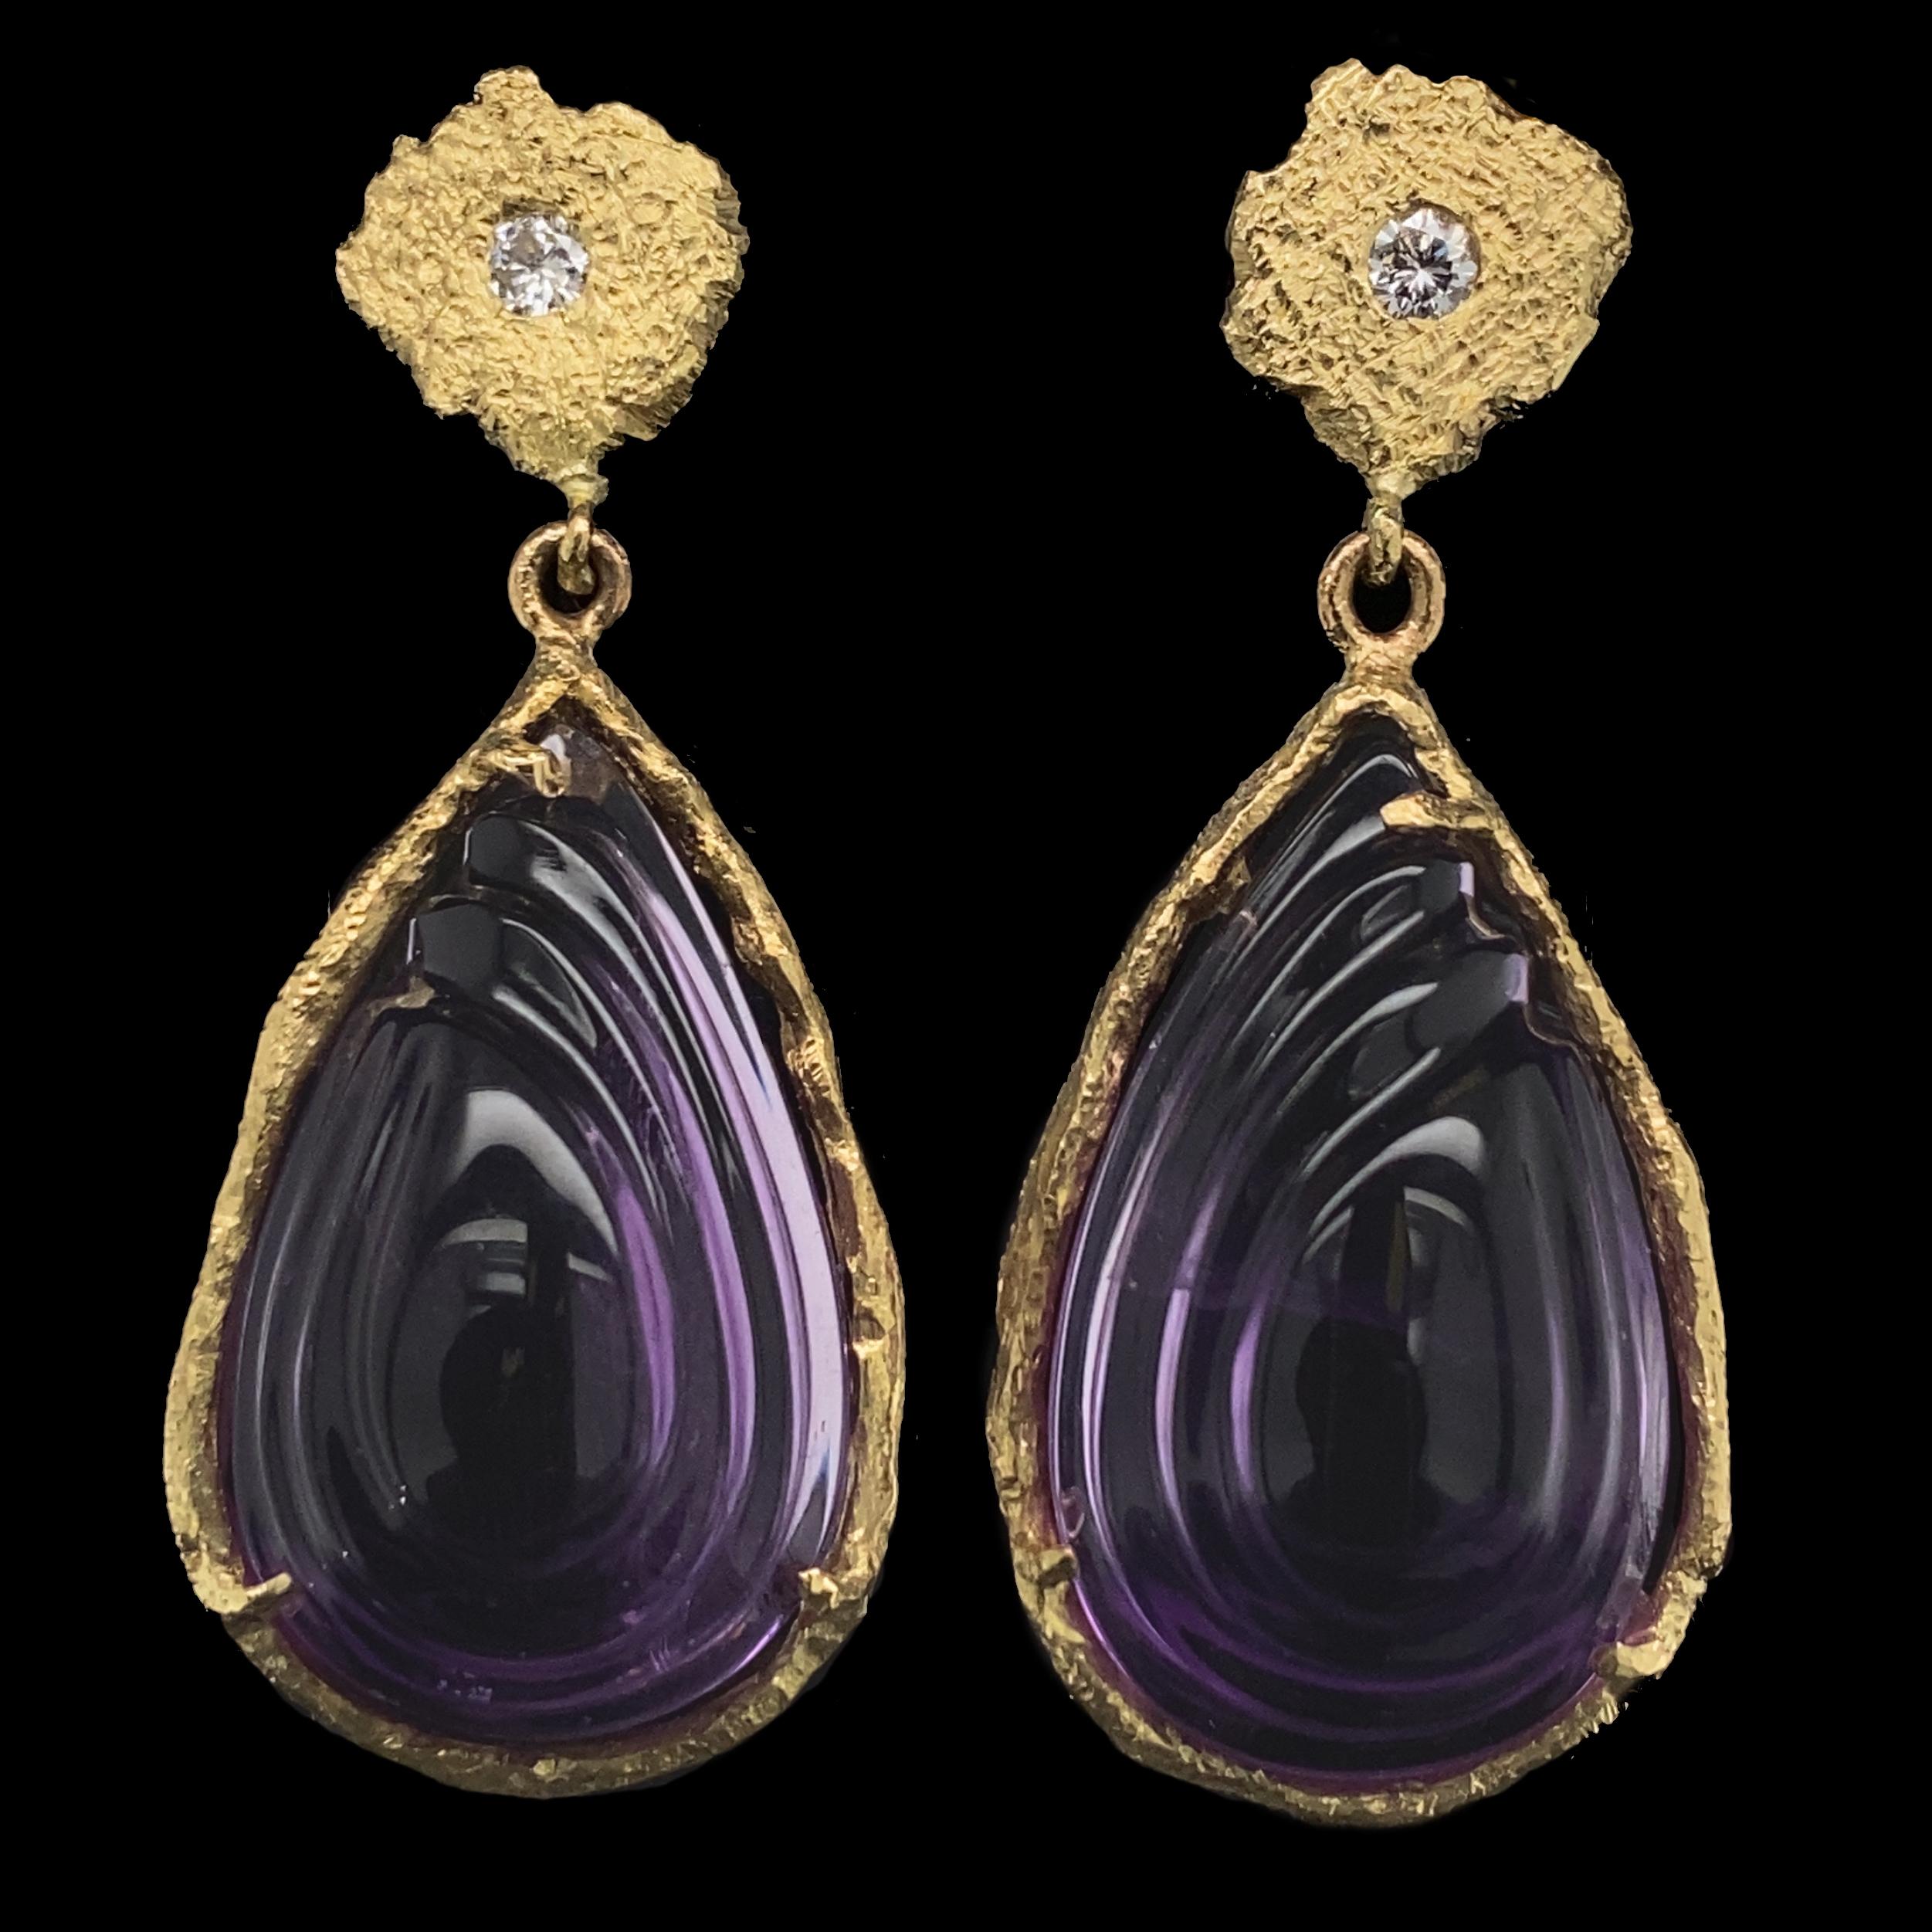 Eytan Brandes bought a trio of carved amethysts (cut for earrings and a pendant) at a trade show several years ago.  Originally, he intended them as a matched set with a lot of diamonds, but he never got around to it and eventually put the project